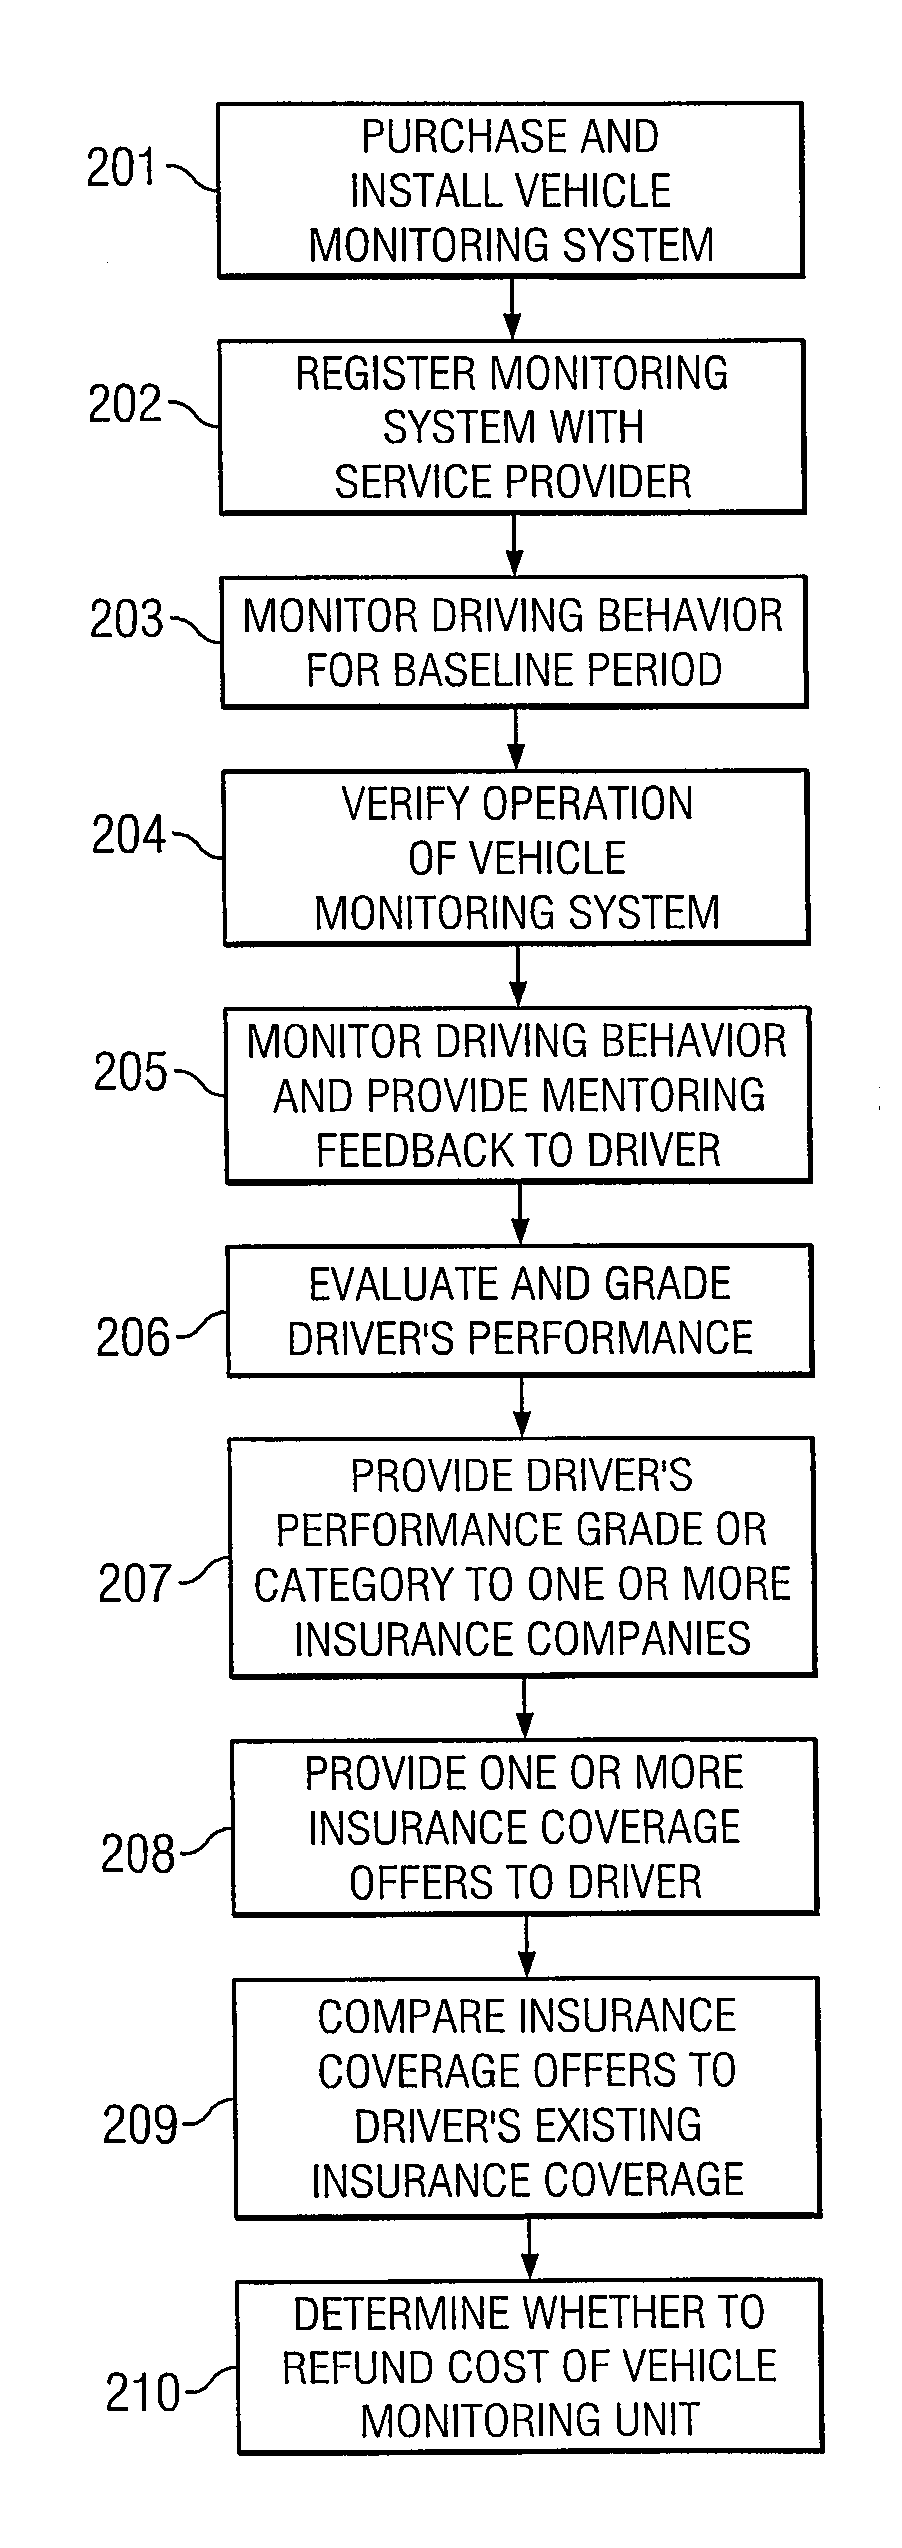 System and method for categorizing driving behavior using driver mentoring and/or monitoring equipment to determine an underwriting risk